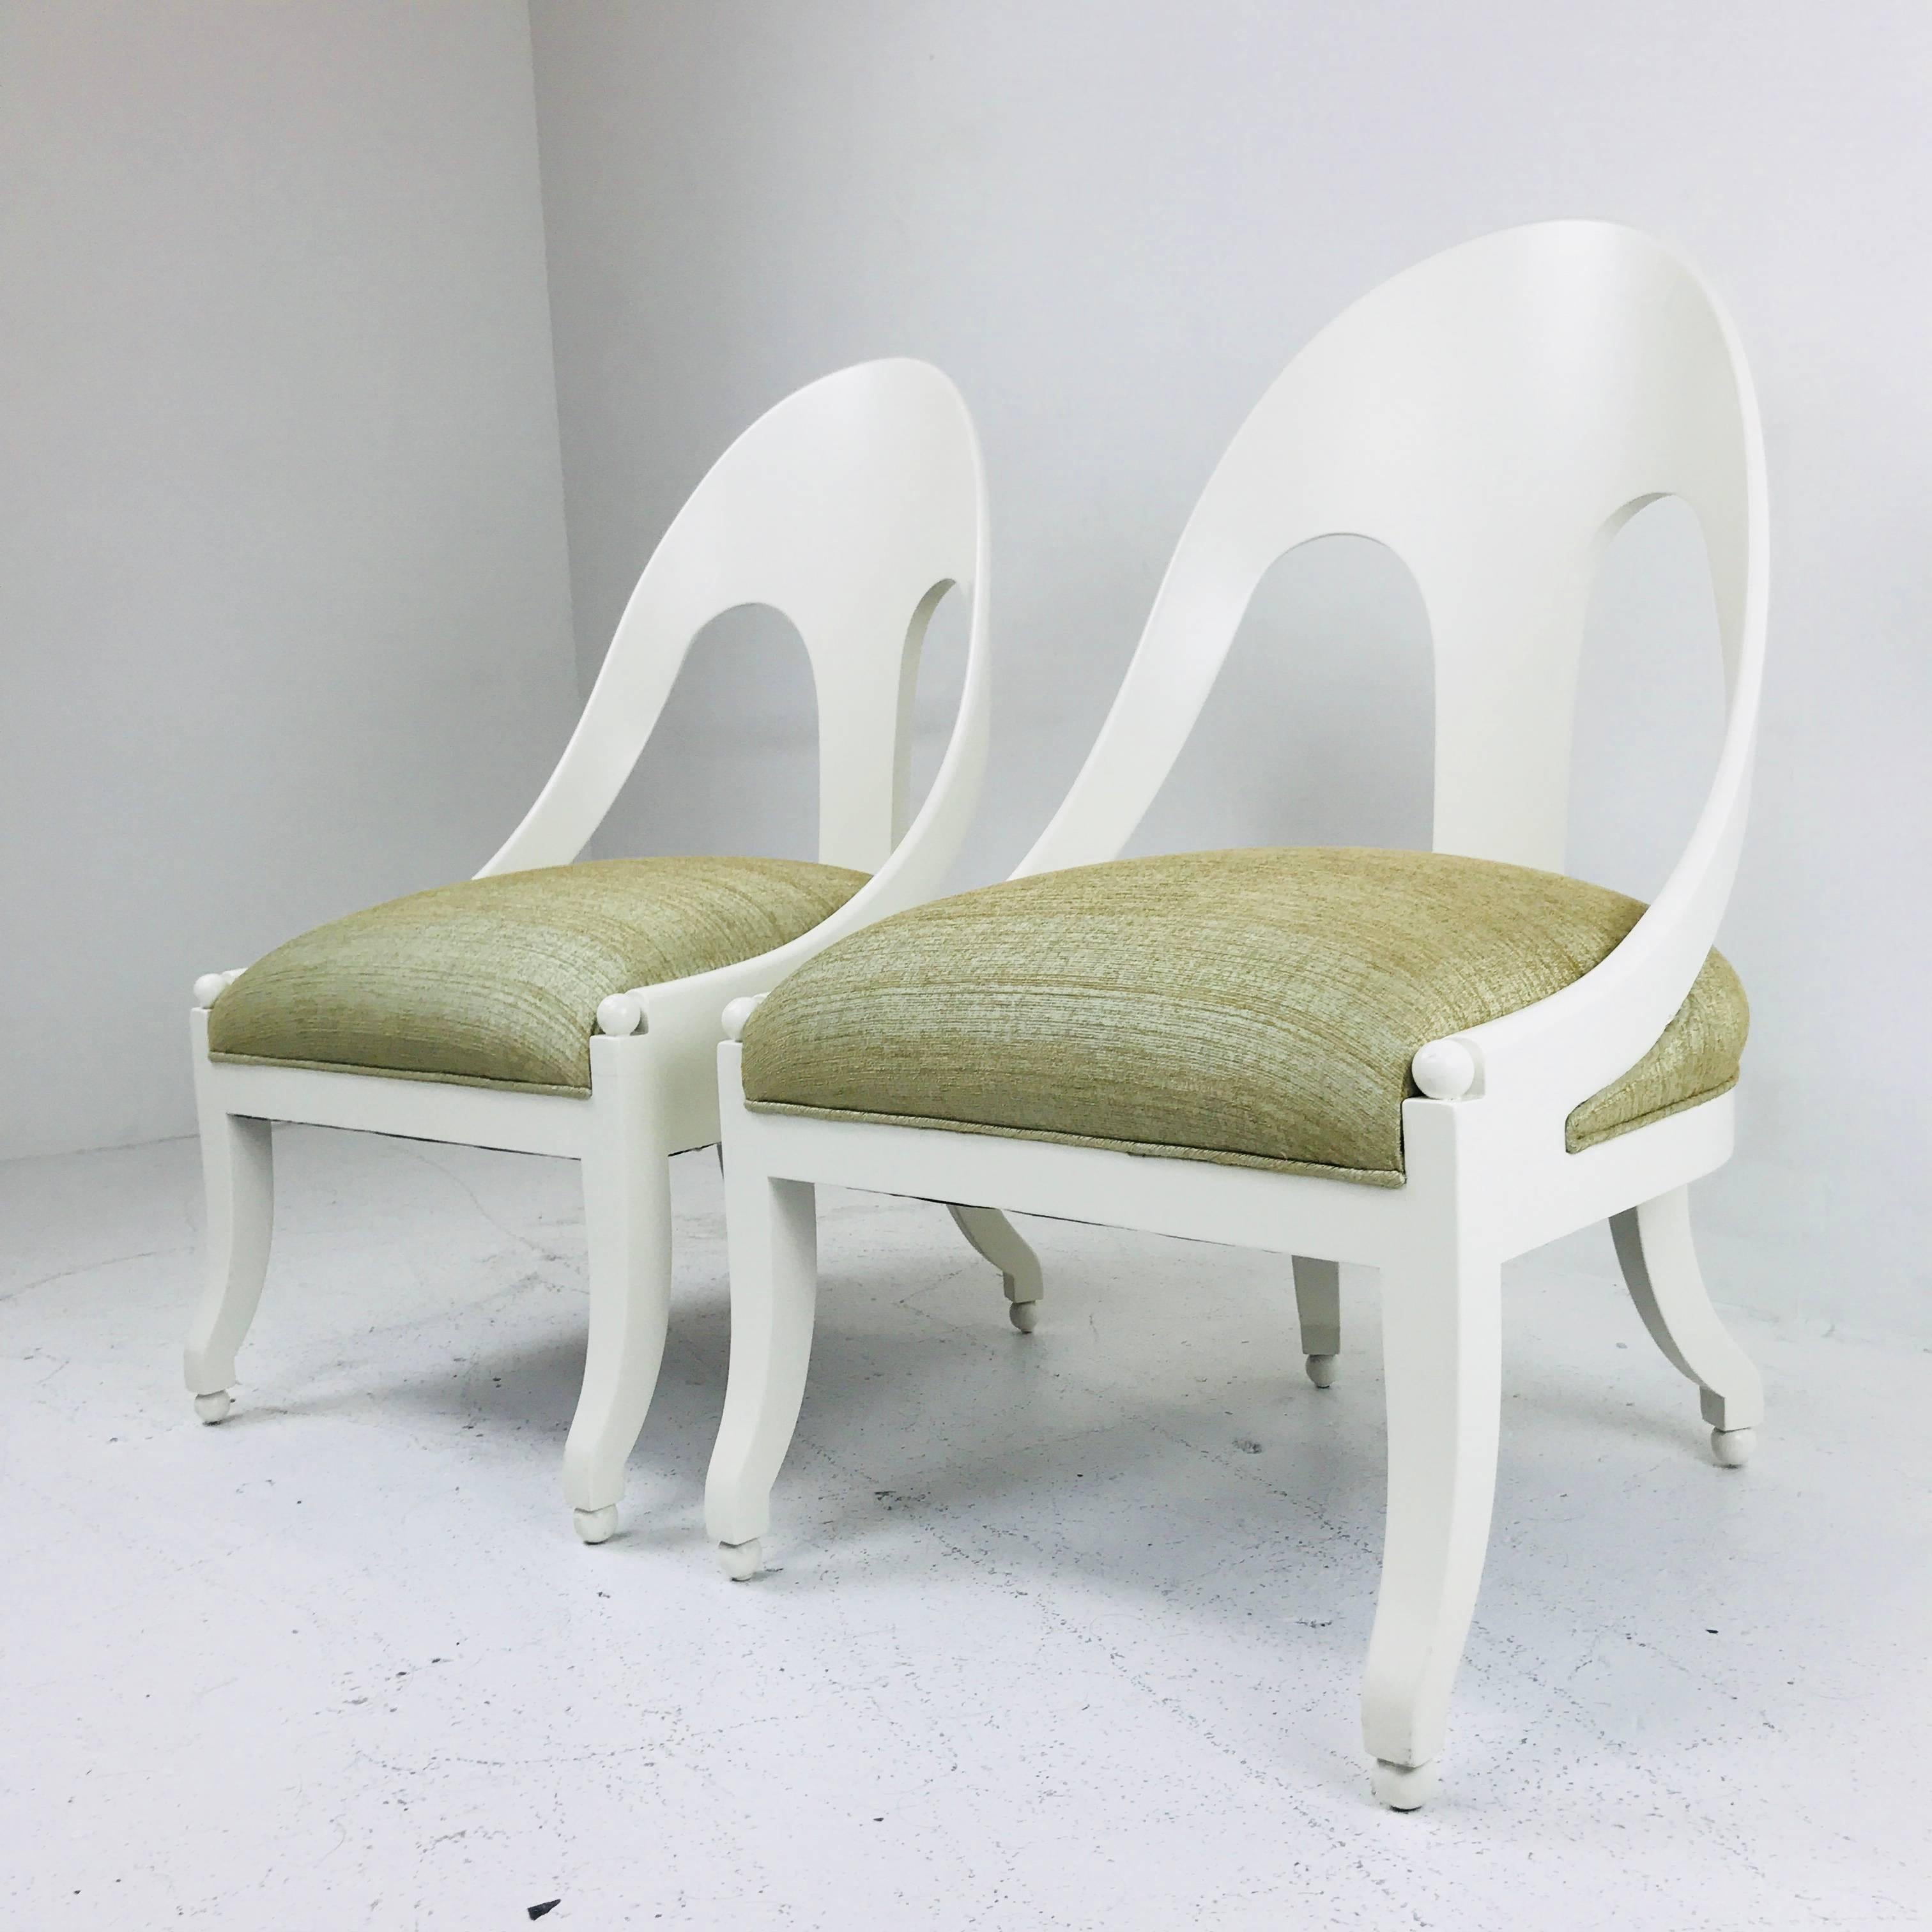 20th Century Pair of Lacquered Spoon Back Chairs by Baker